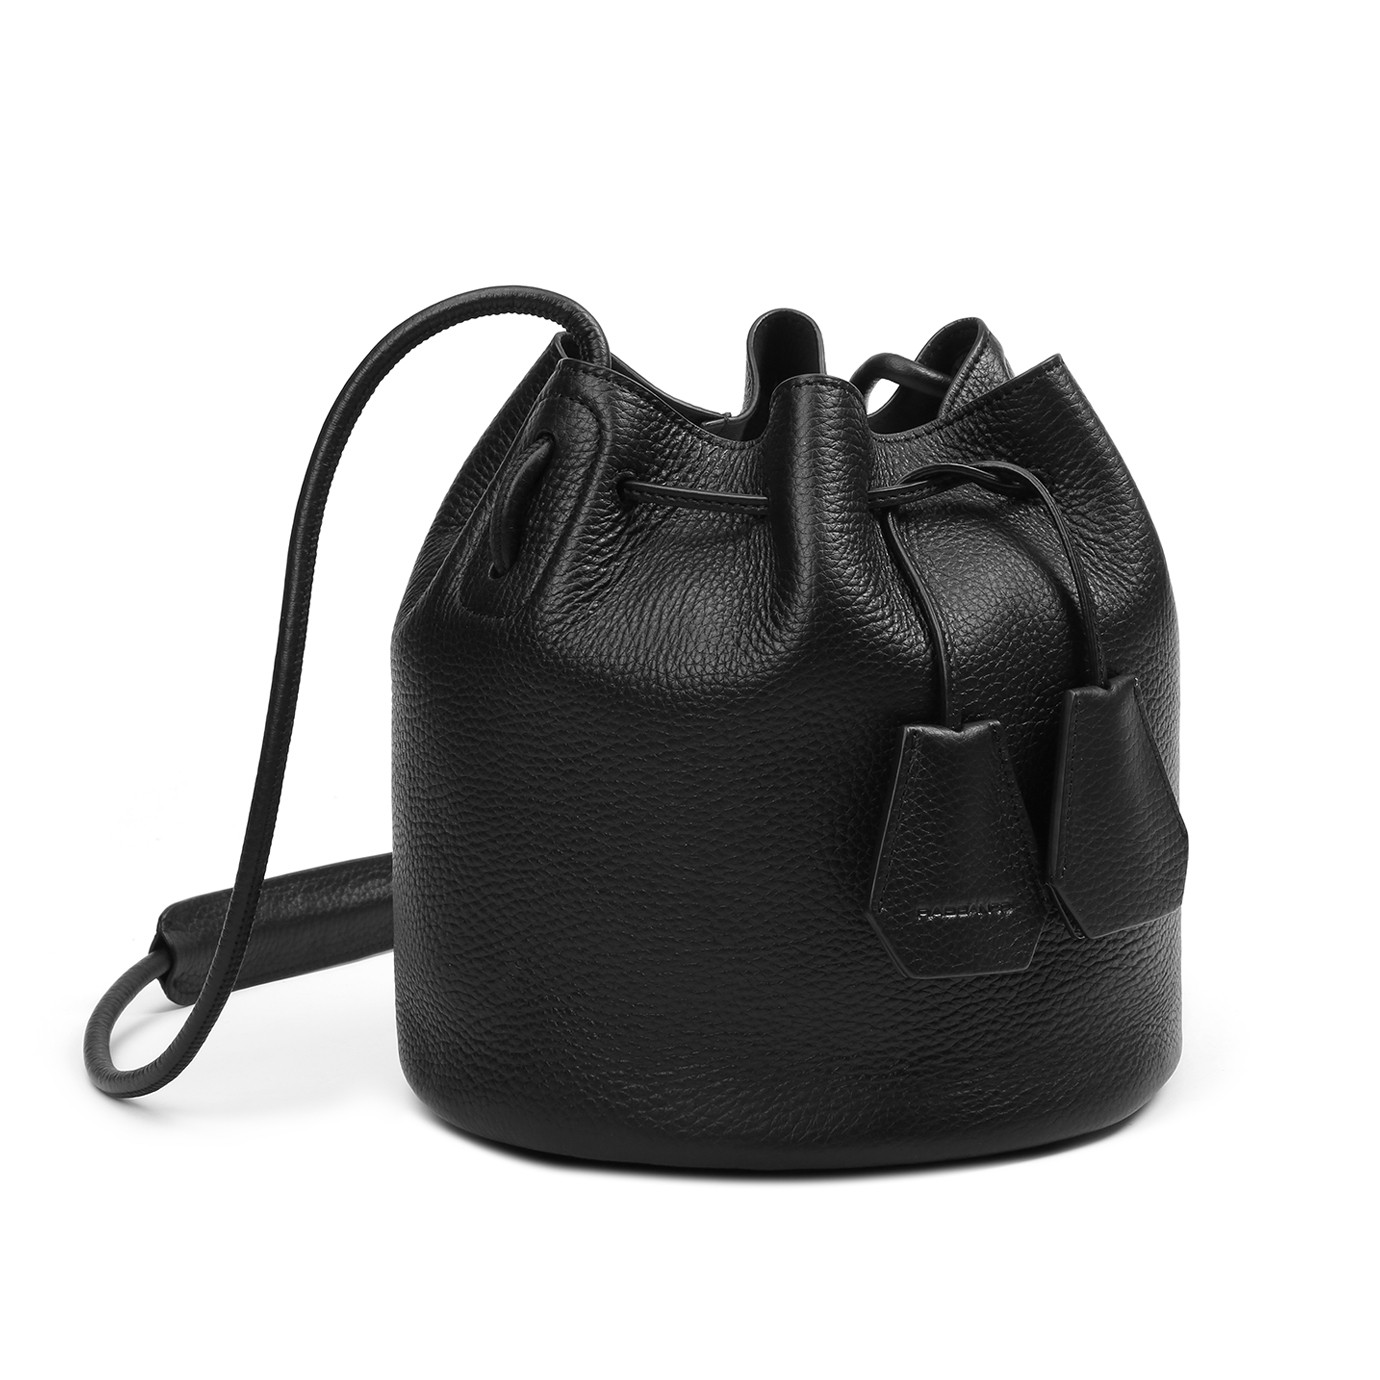 RABEANCO - SPACE Small Shoulder Bag